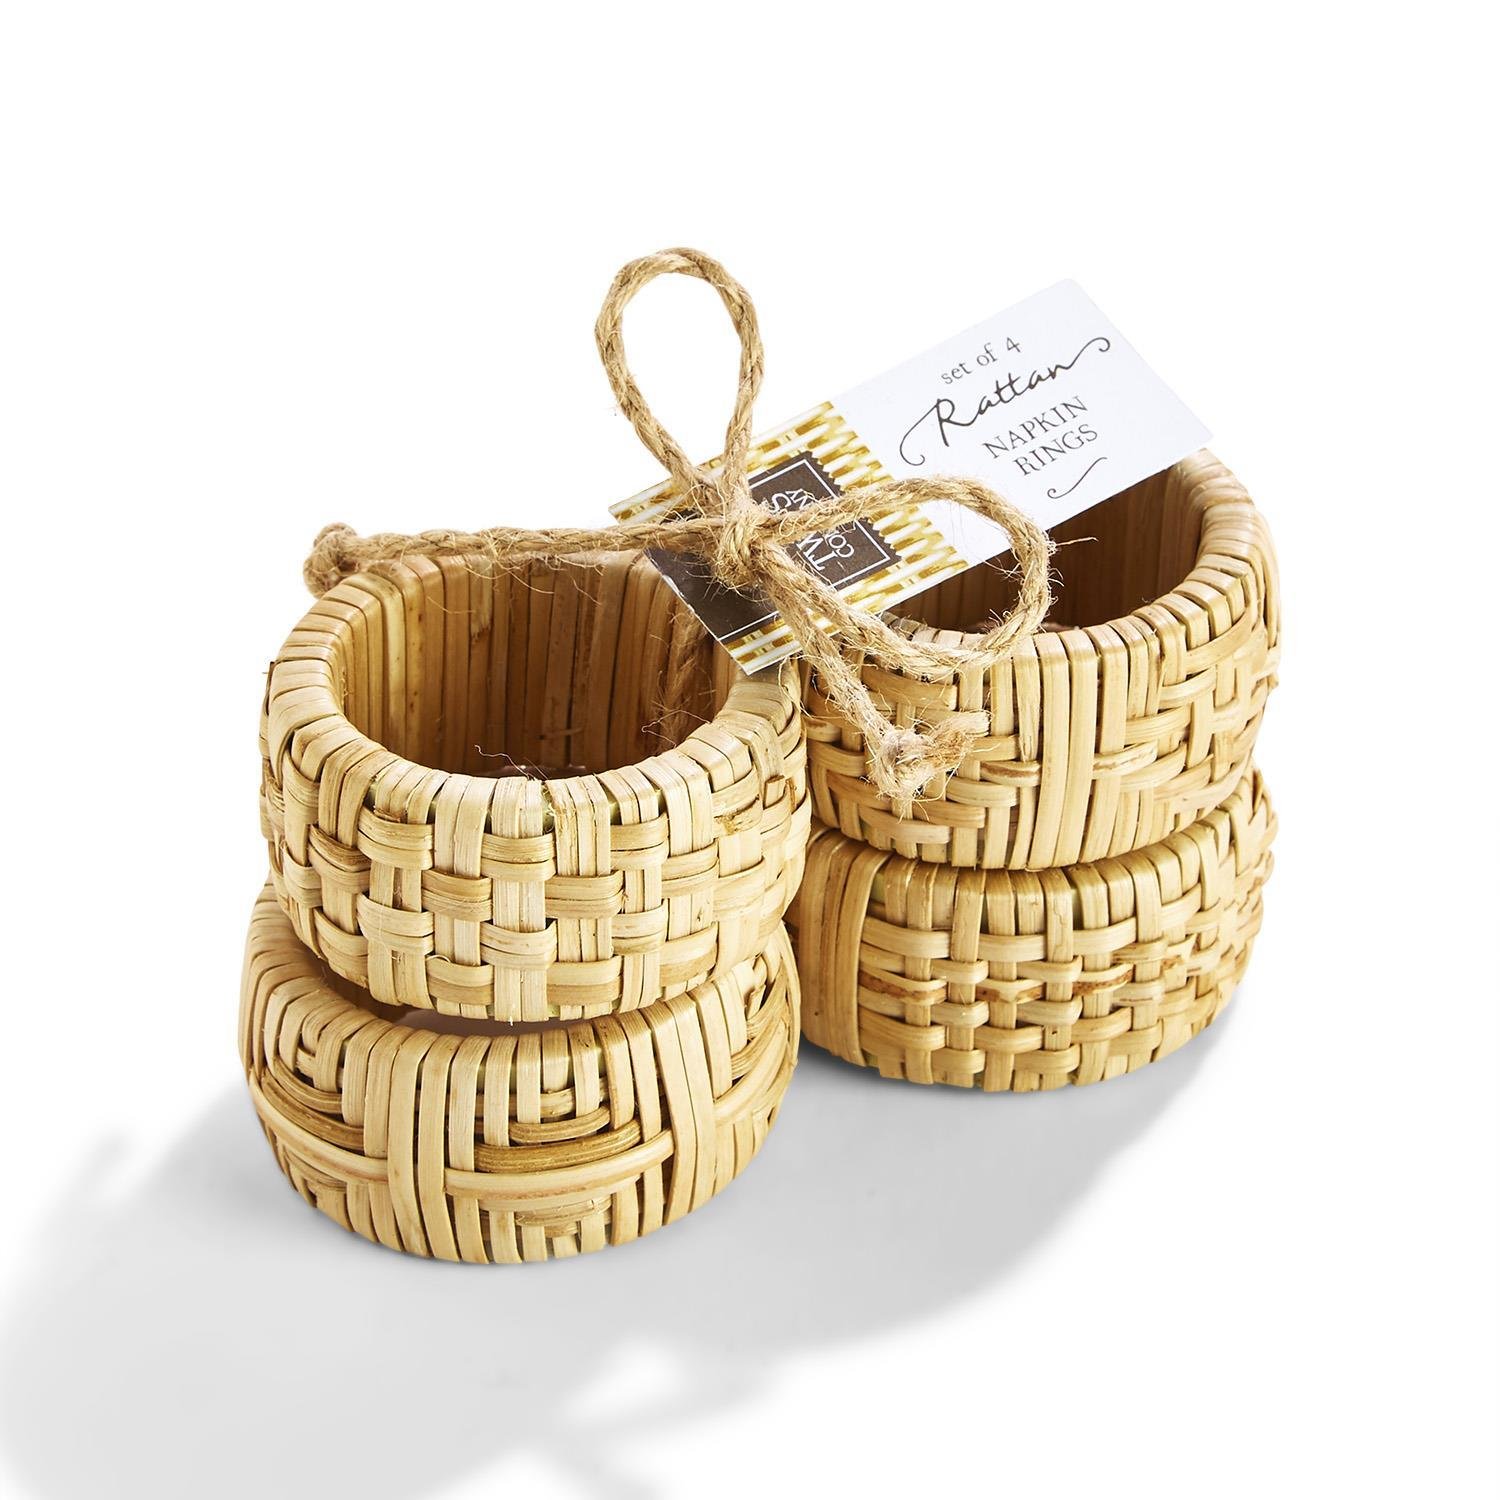 35064 - S/4 Cane Napkin Rings (3 sets) - $32/each